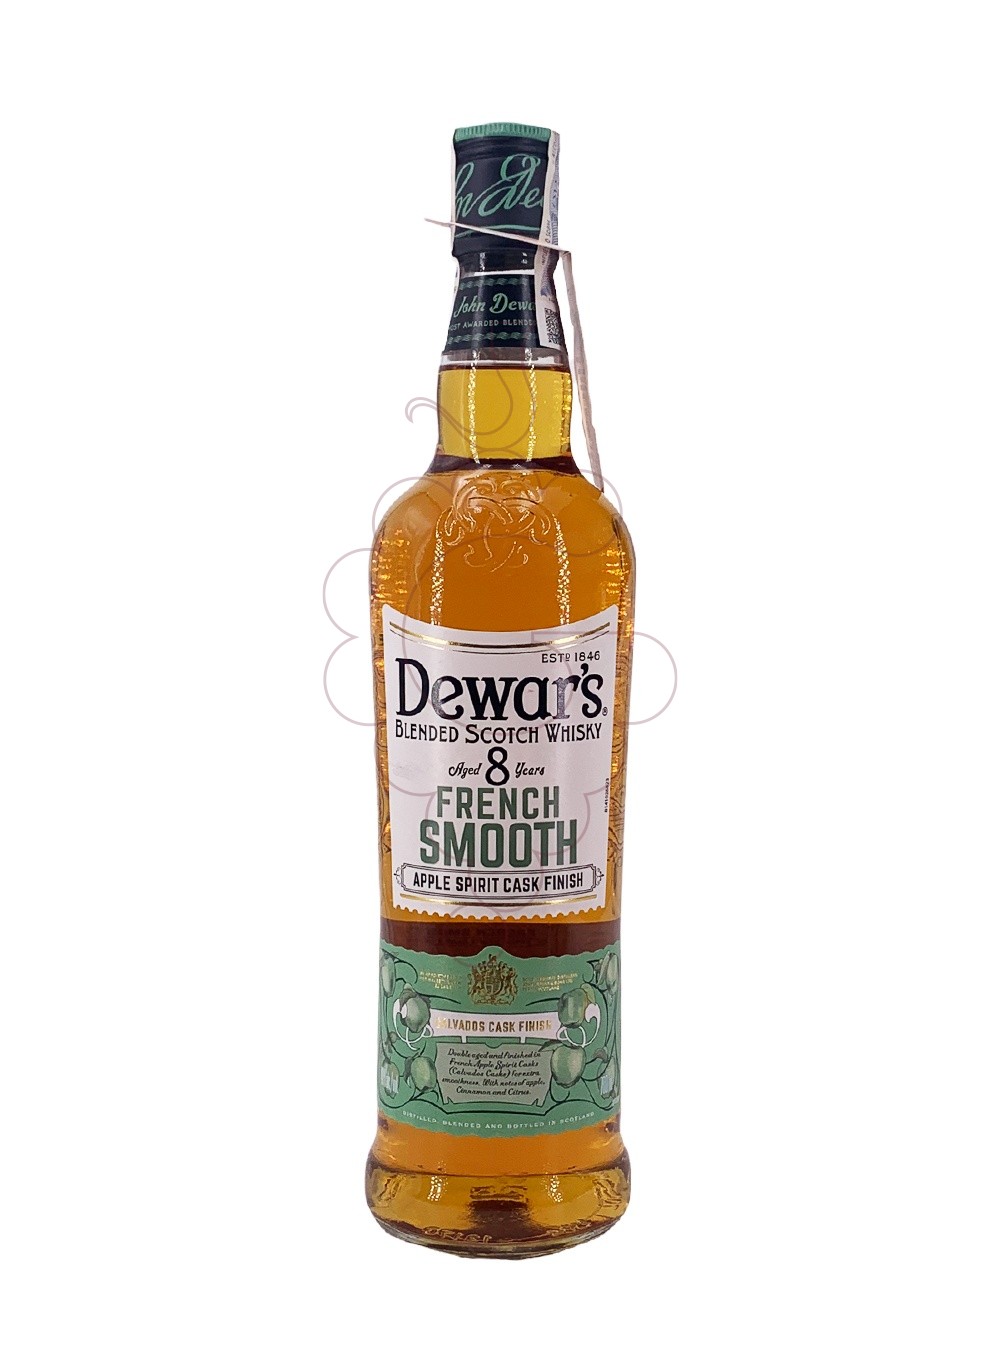 Photo Whisky Dewar's French Smooth 8 Years